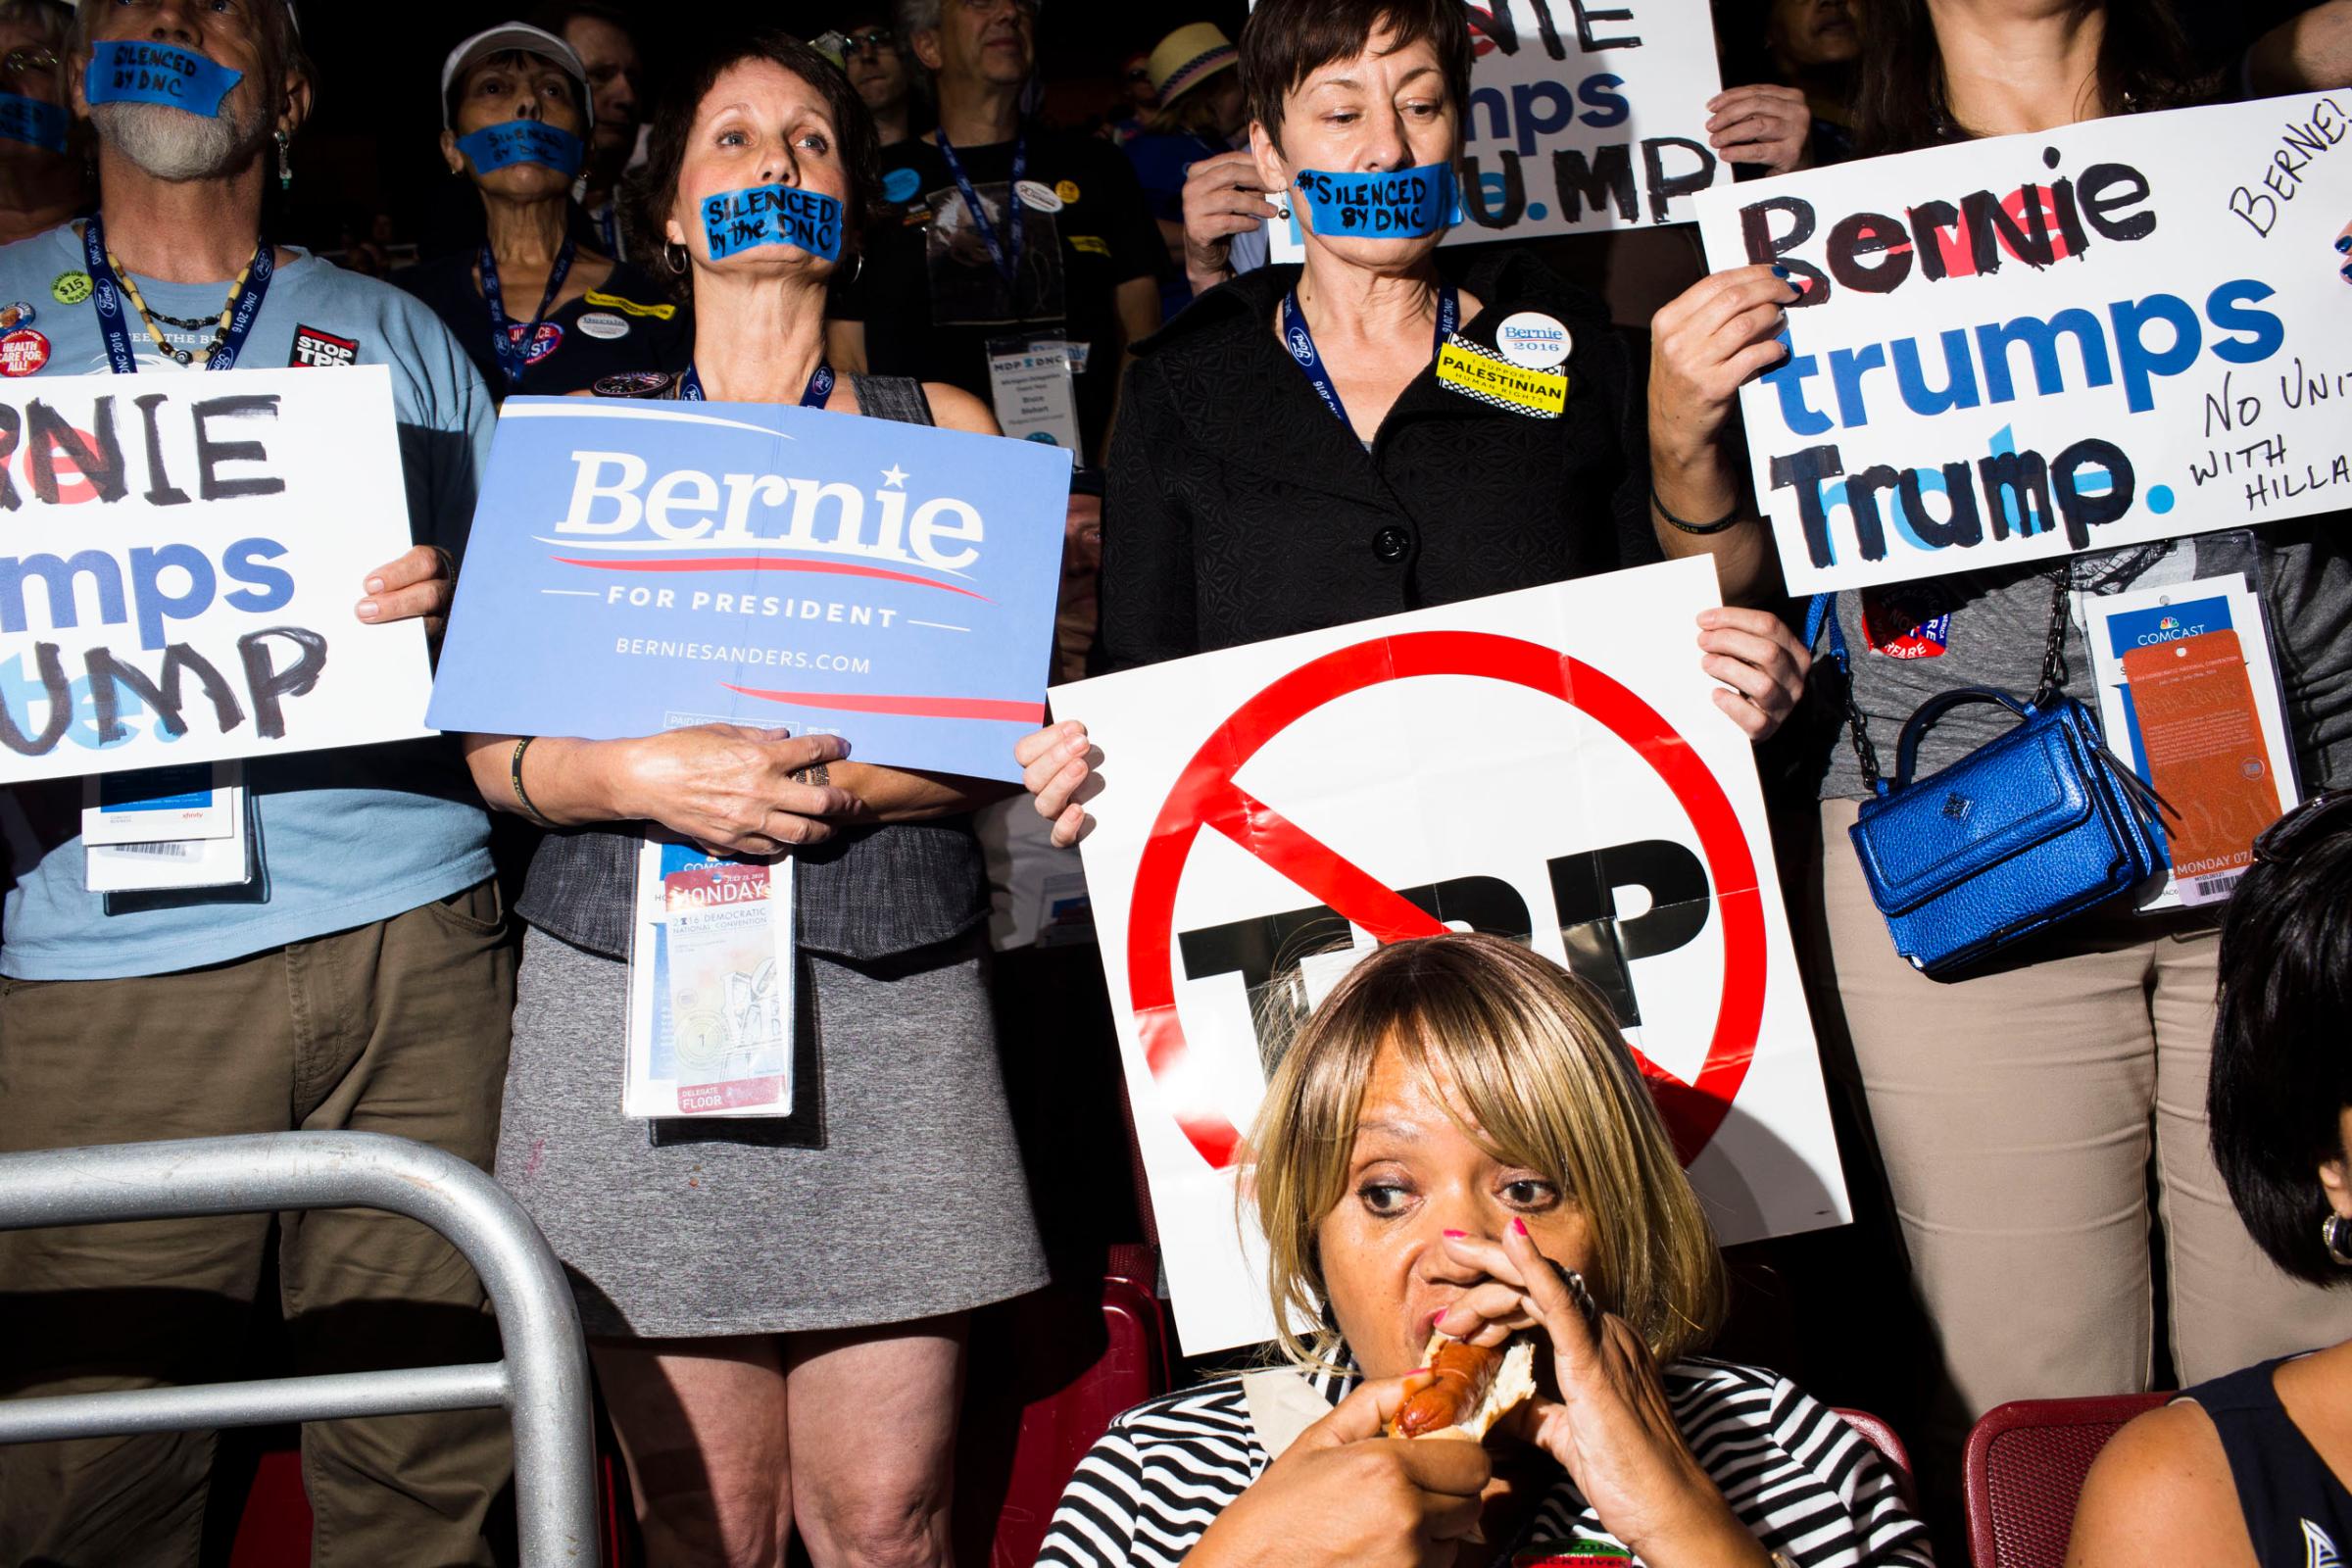 Scenes on the floor at the 2016 Democratic National Convention in Philadelphia on Monday, July 25, 2016.